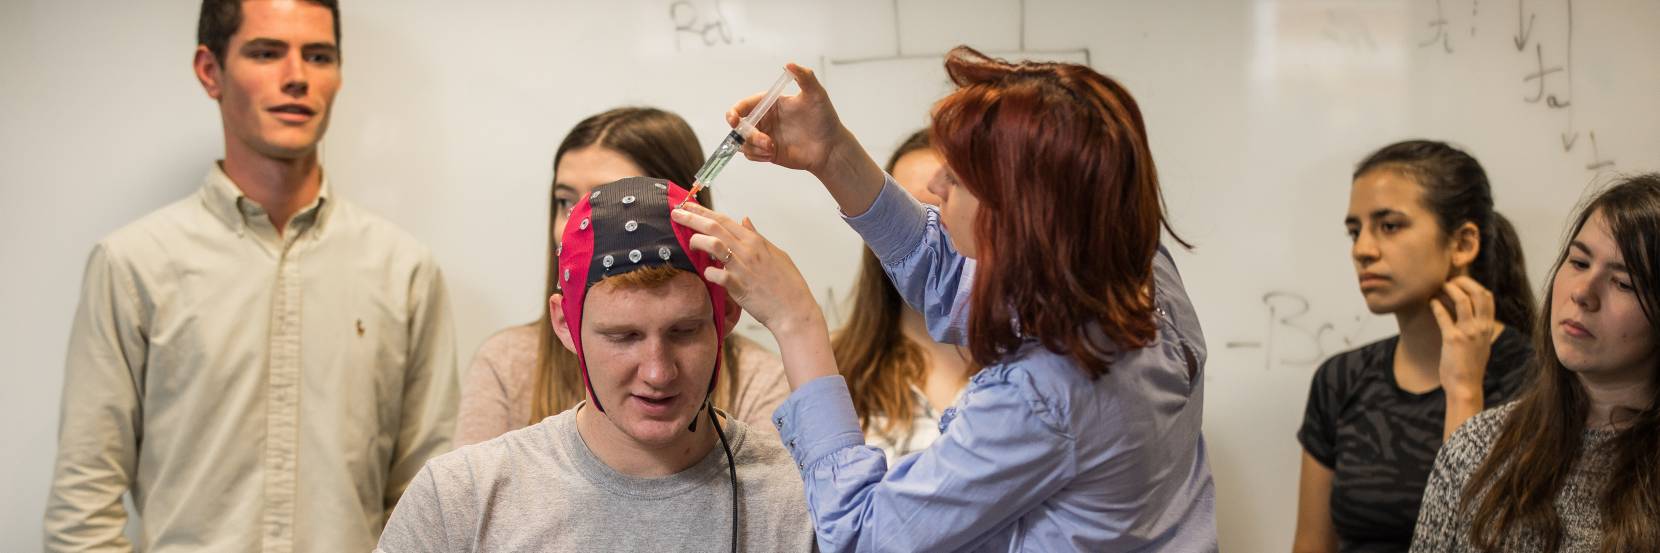 Lecturer demonstrating an EEG is a test to a class. A student wears a headpiece used to evaluate the electrical activity in the brain